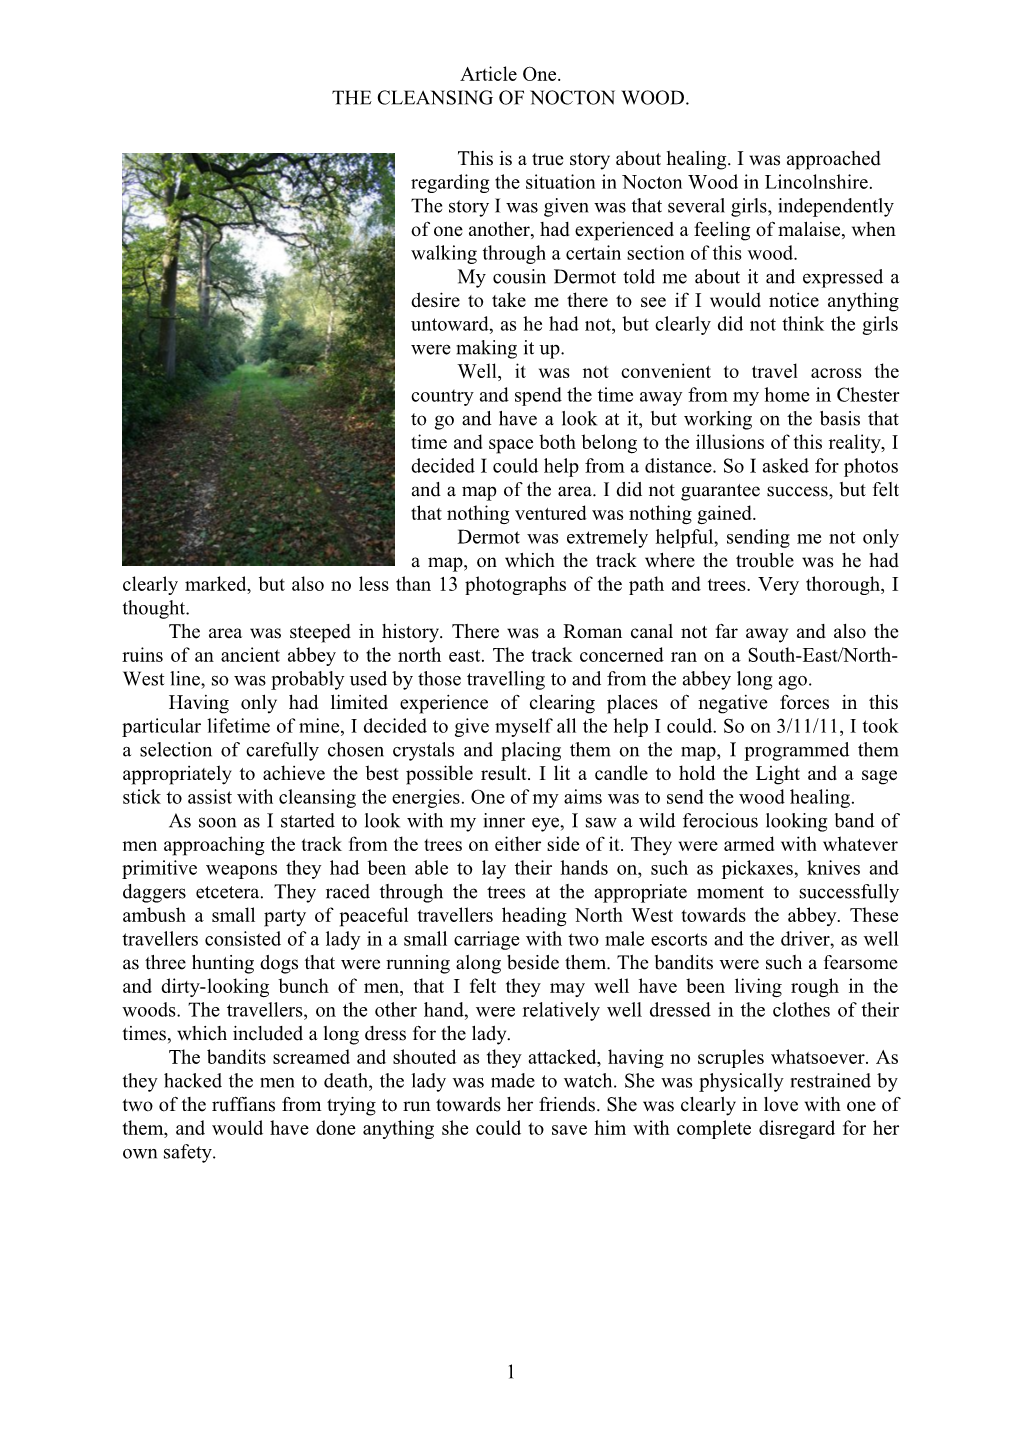 The Cleansing of Nocton Wood